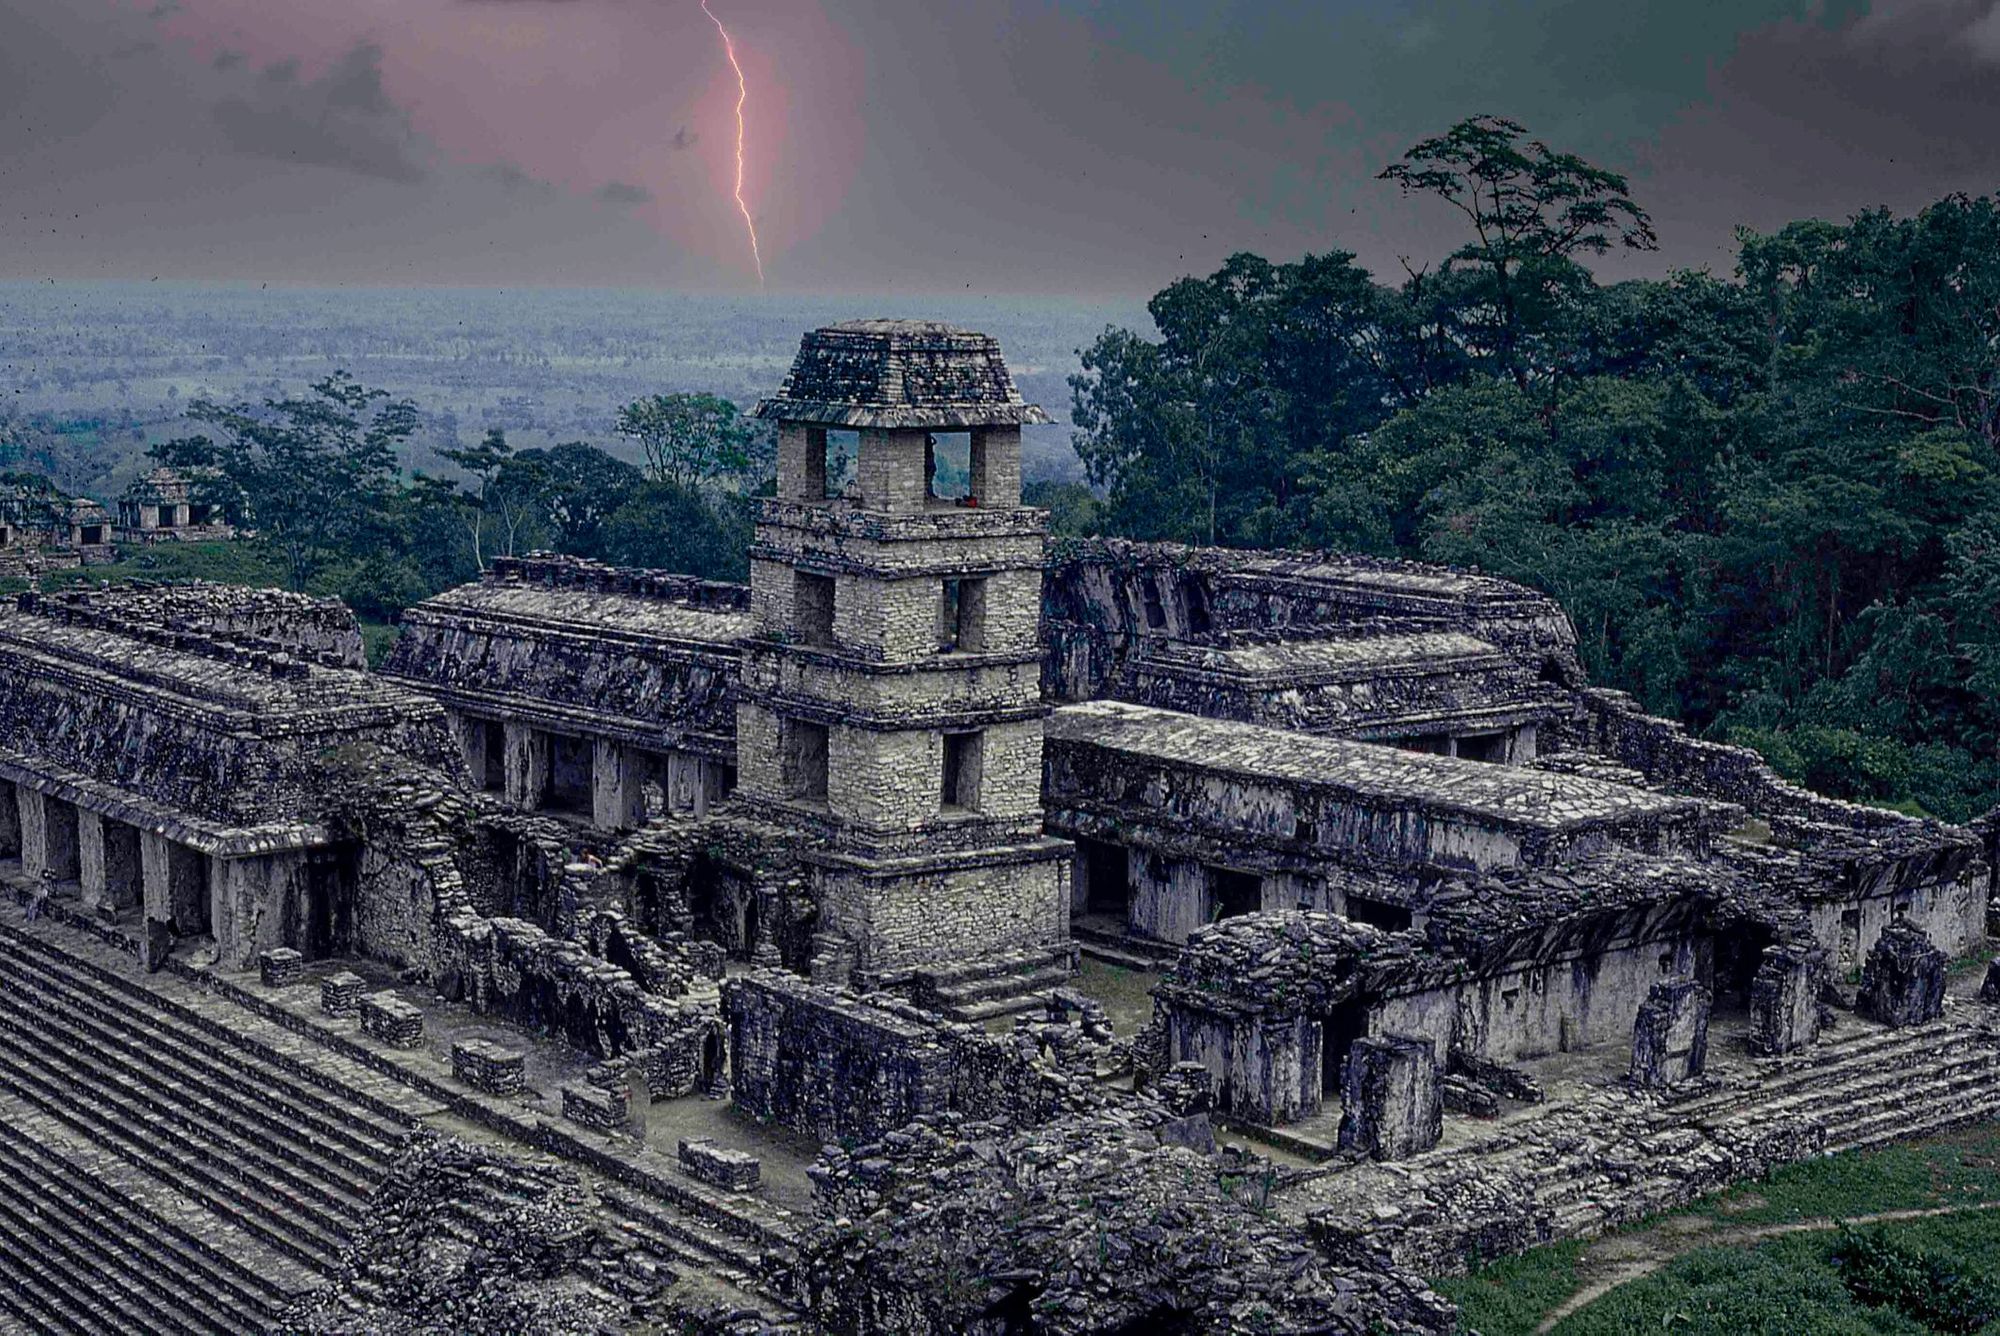 Palenque Palace, built during the reign of King Pakal - part of the Palenque ruins site in Chiapas, Mexico